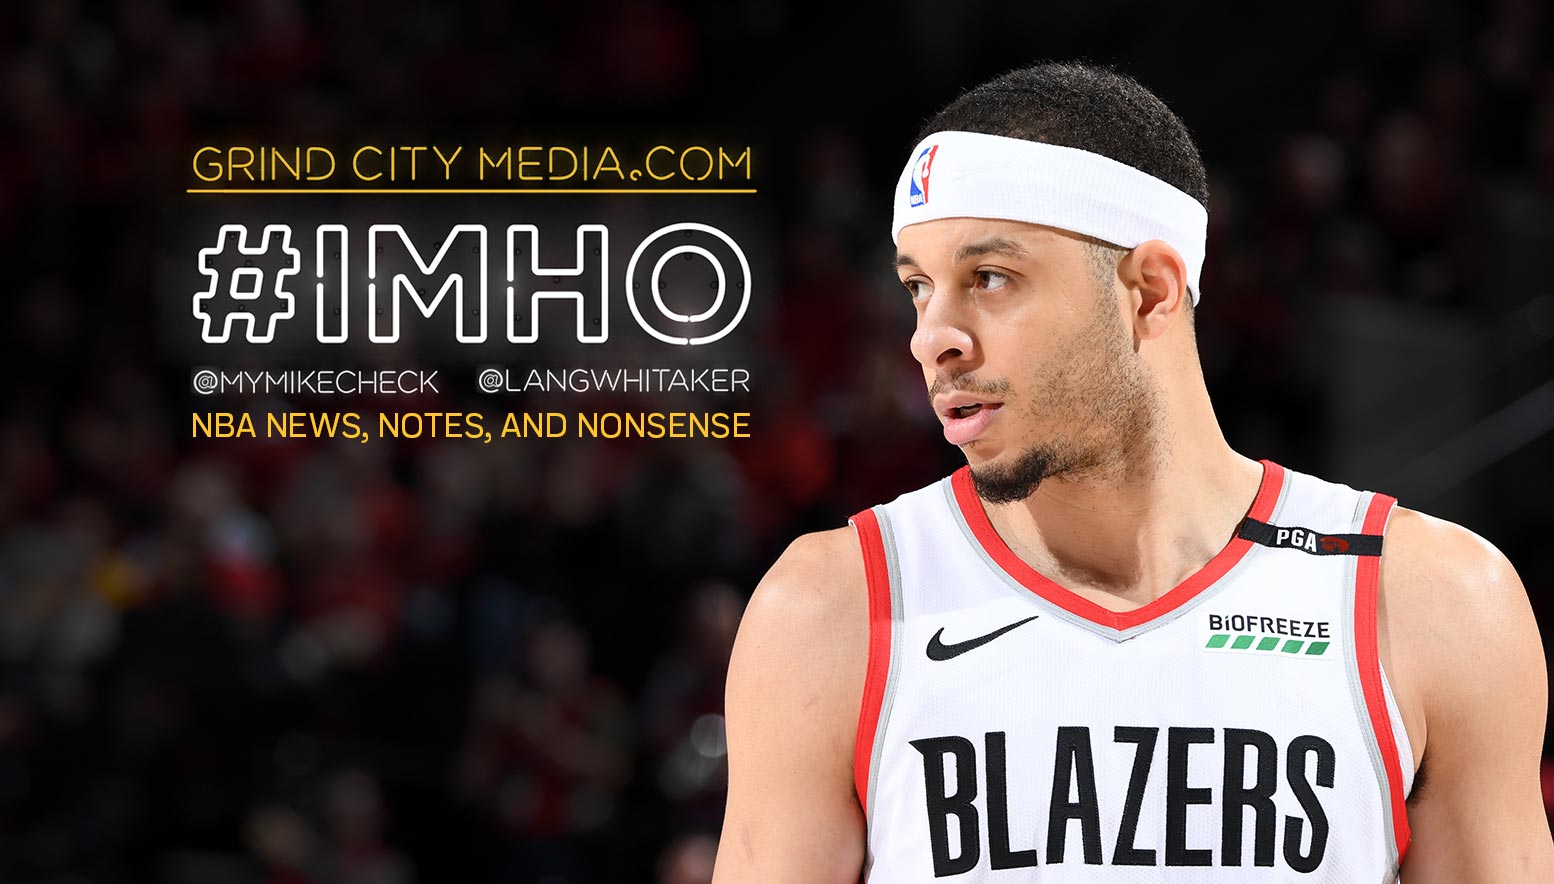 #IMHO: Blazers, Lakers and the All-Timers